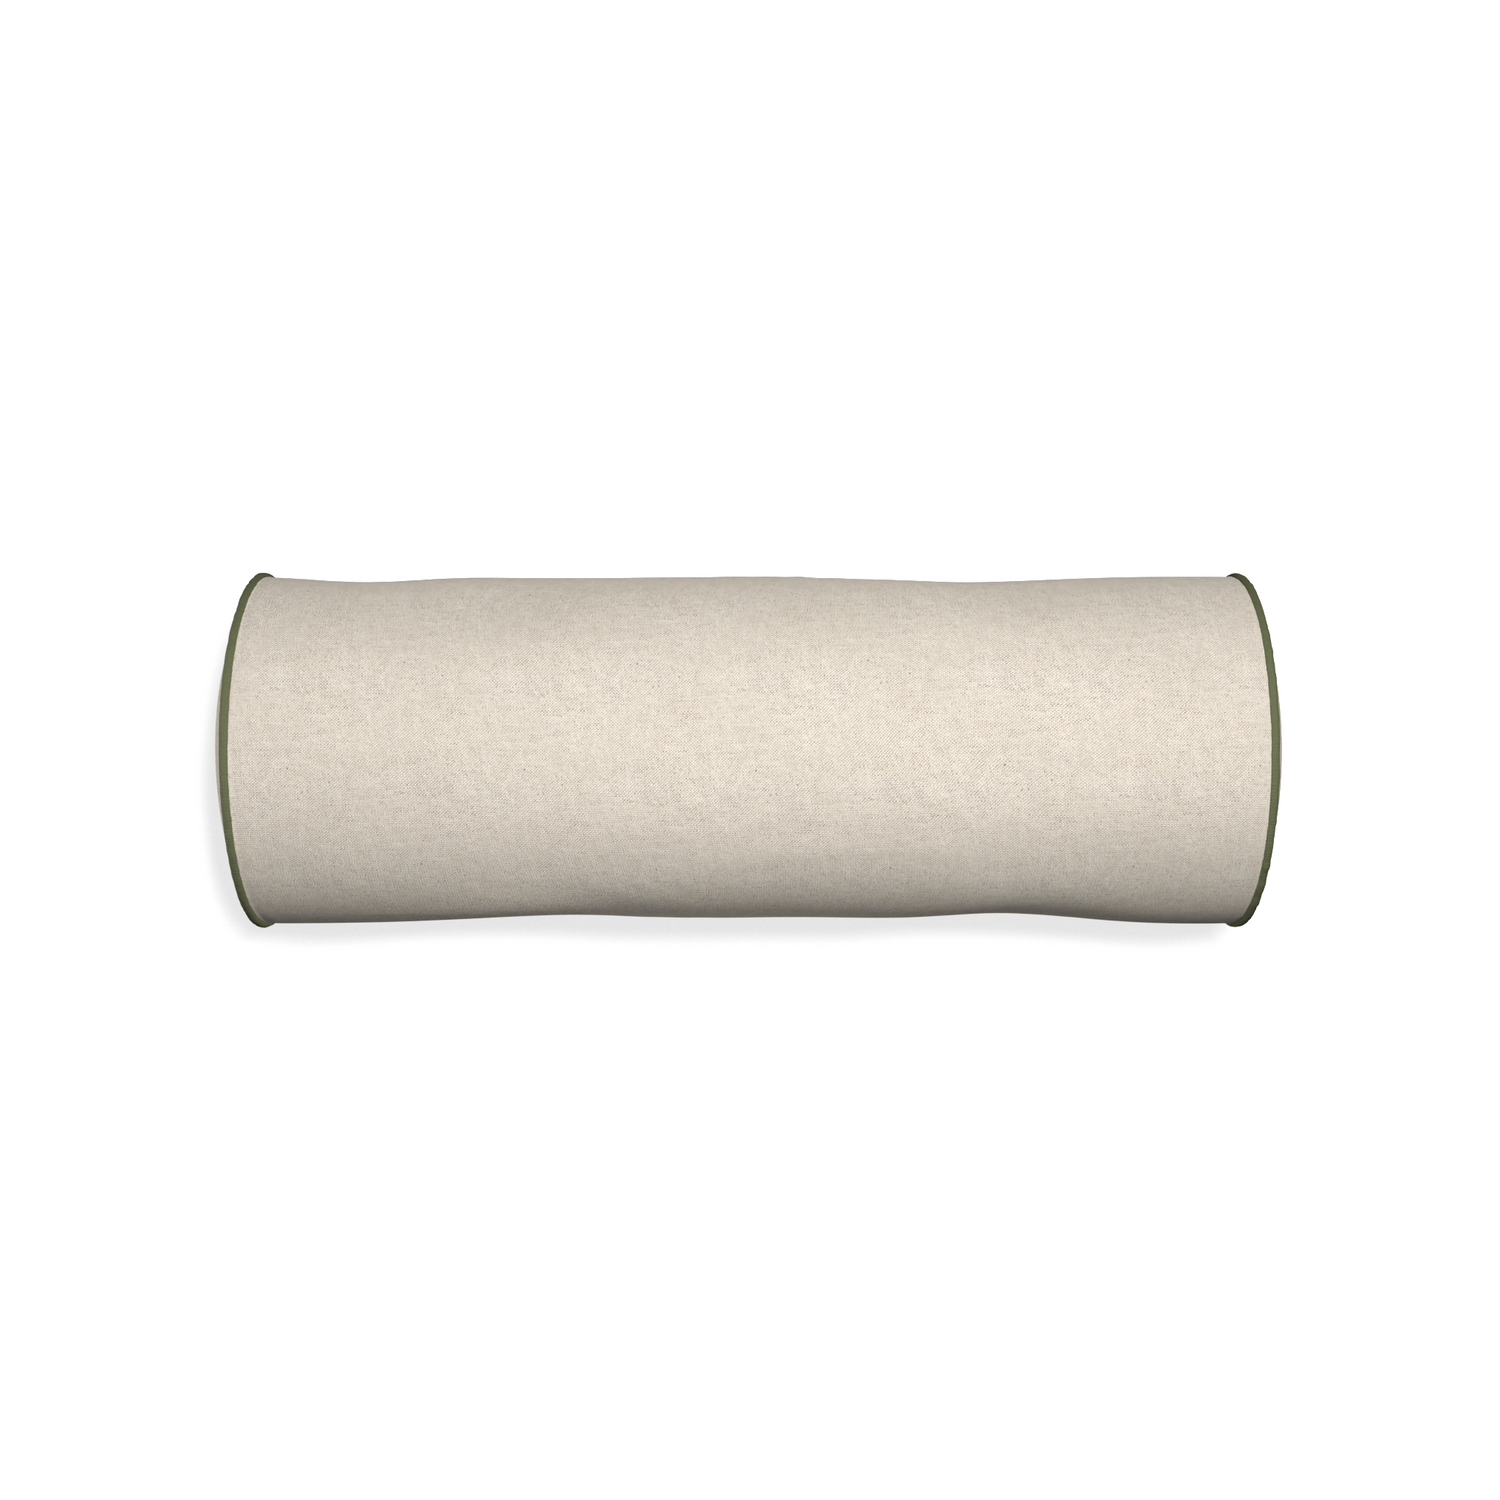 Bolster oat custom light brownpillow with f piping on white background